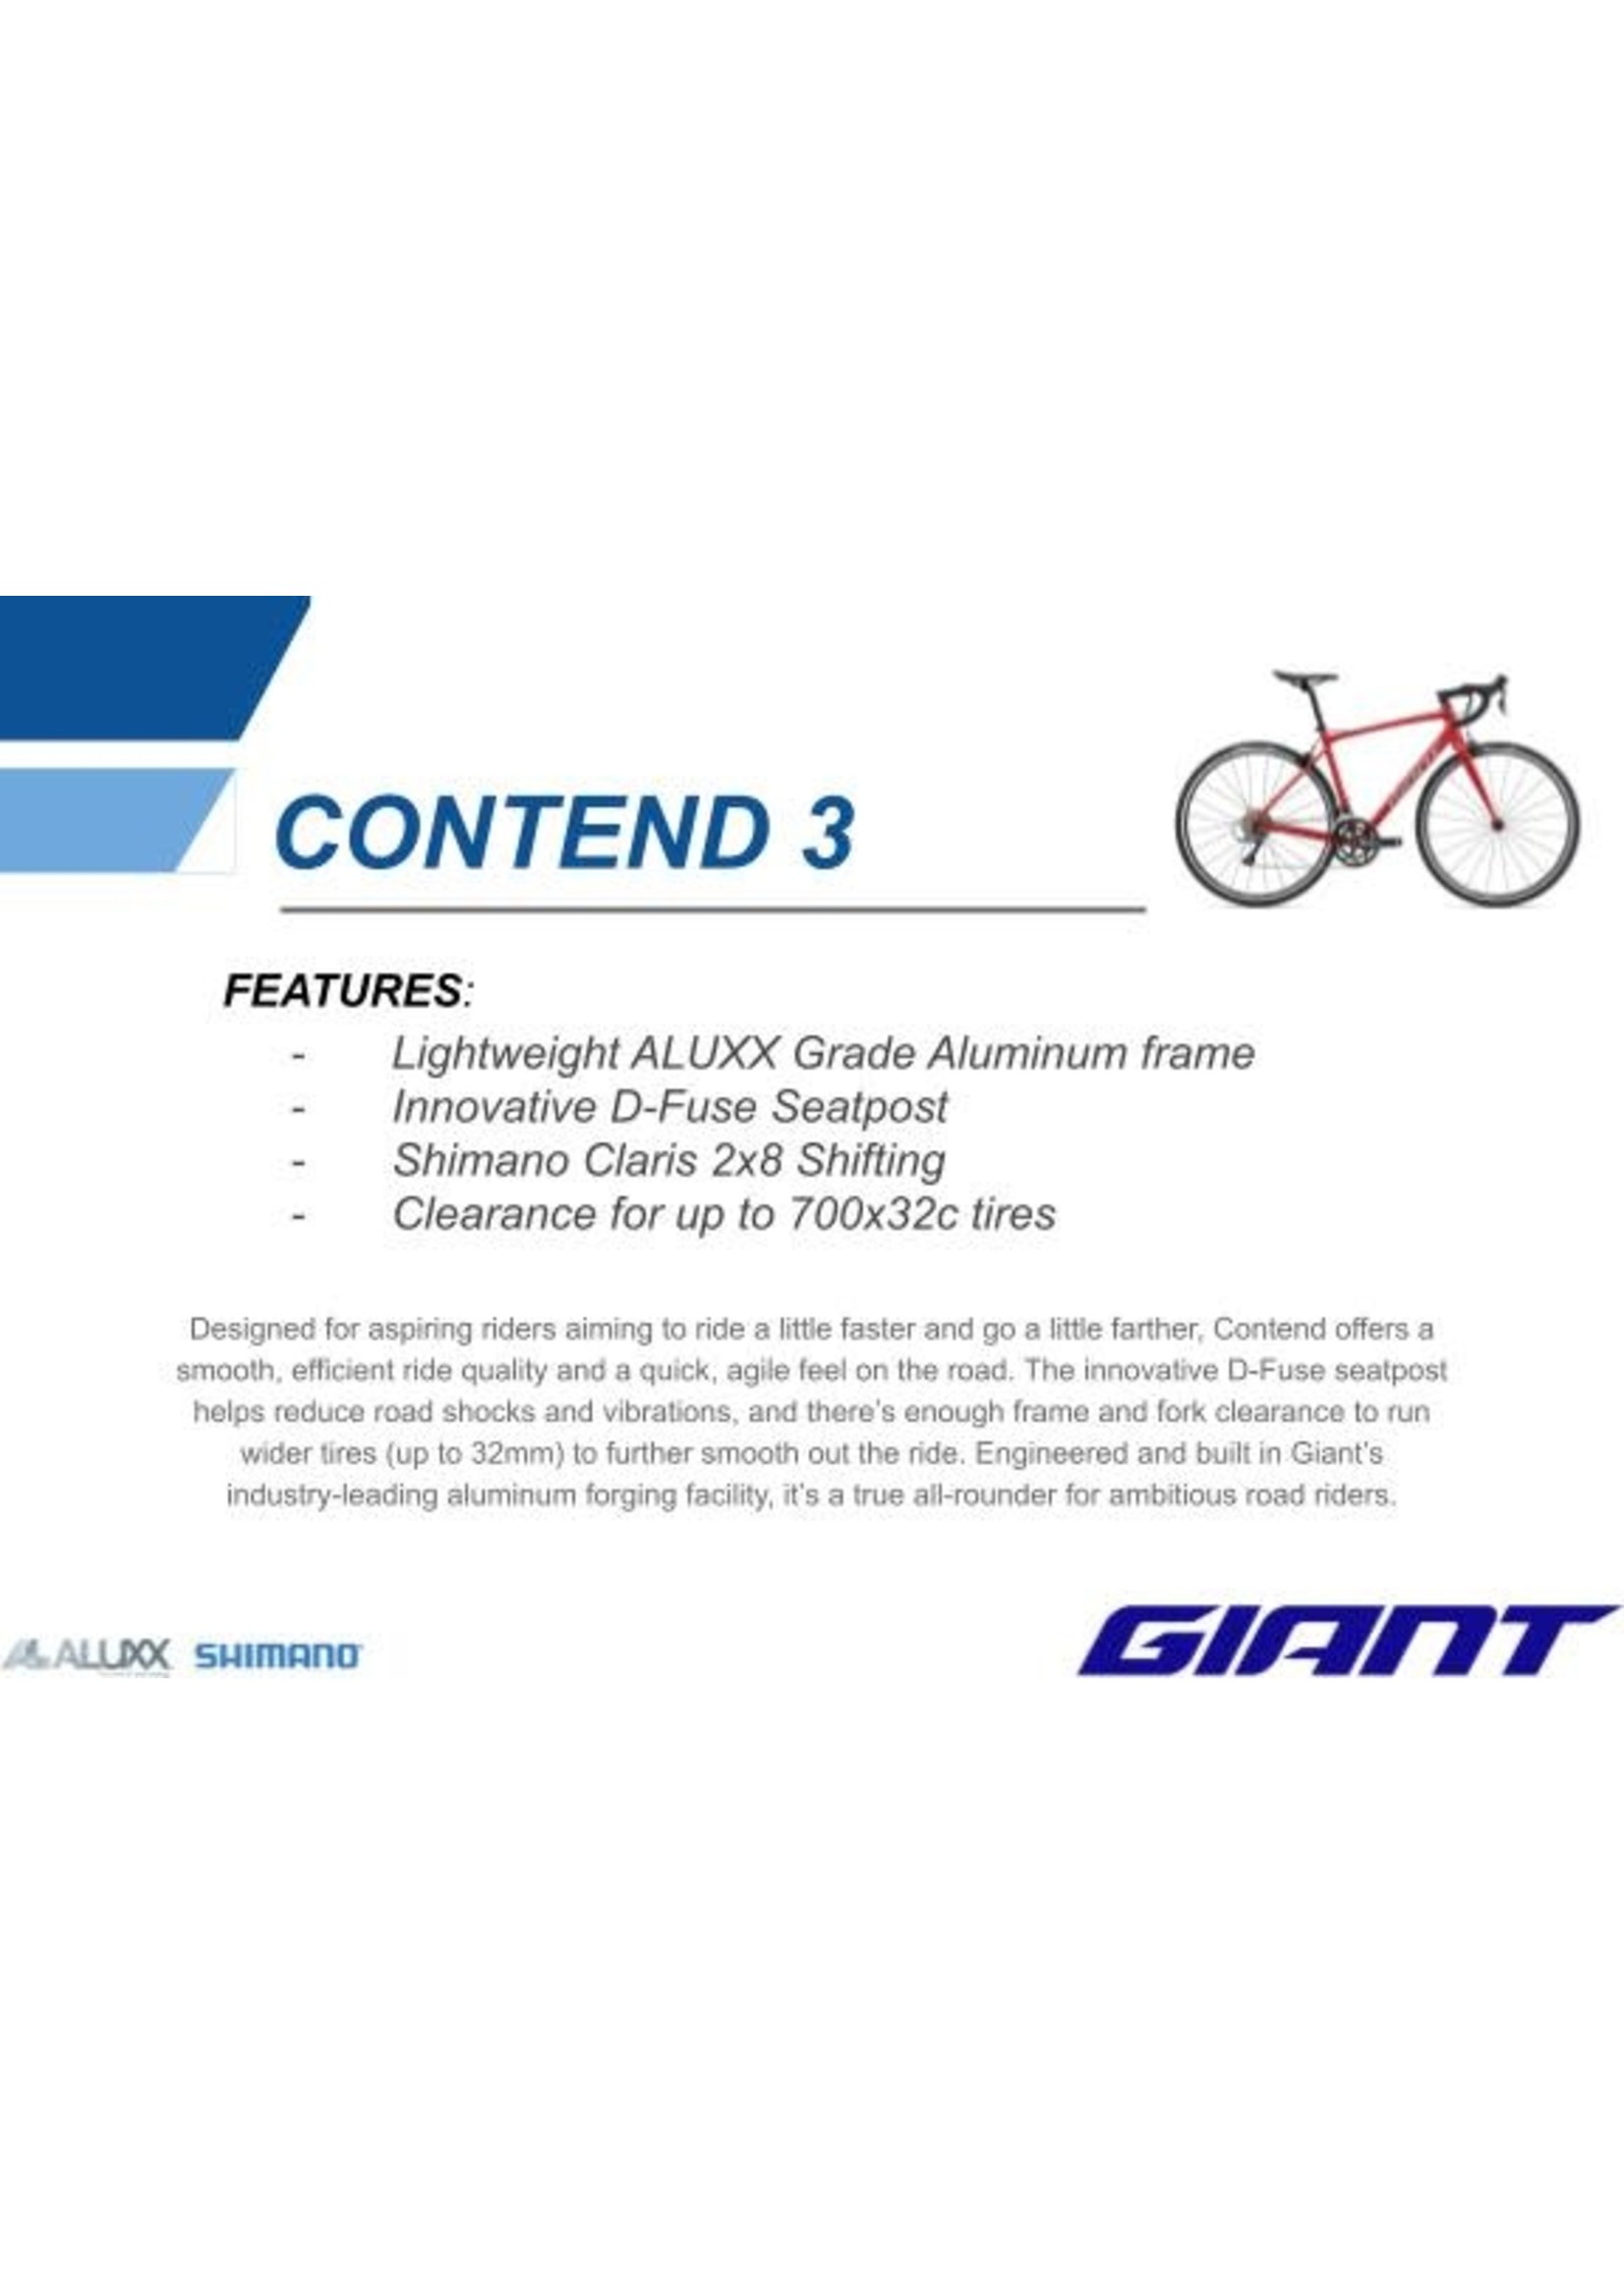 Giant Giant Contend 3